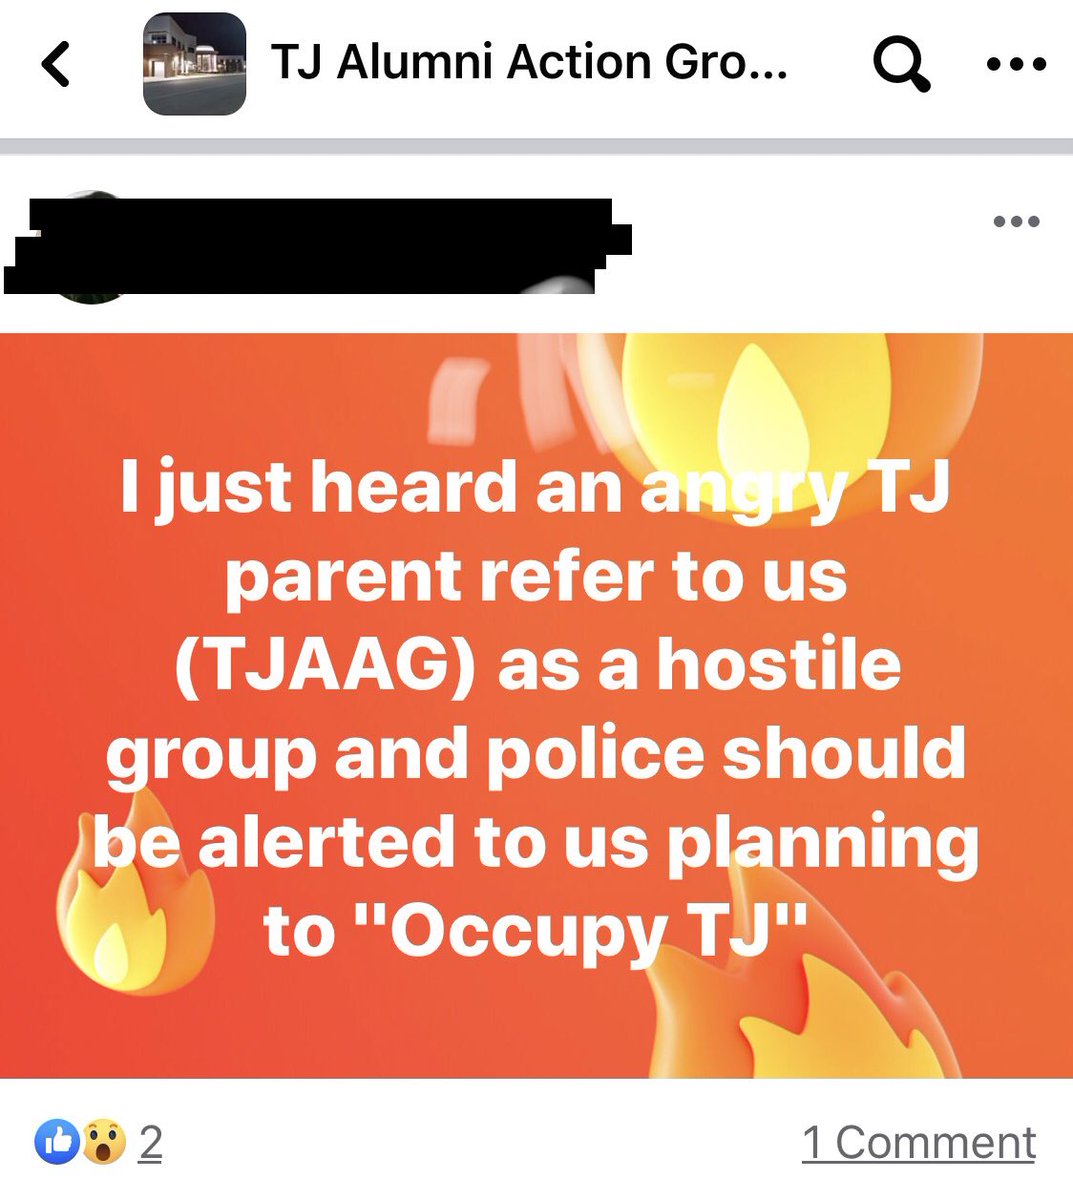 After I spoke up today & exposed “TJ Alumni Action Group” and their scheming to Occupy TJ, they didn’t respond by shutting down such a violent plan but rather to try to shame me as an “angry parent.” Yes, I’m angry. And so should  @GovernorVA  @FCPSSupt. Please protect children.